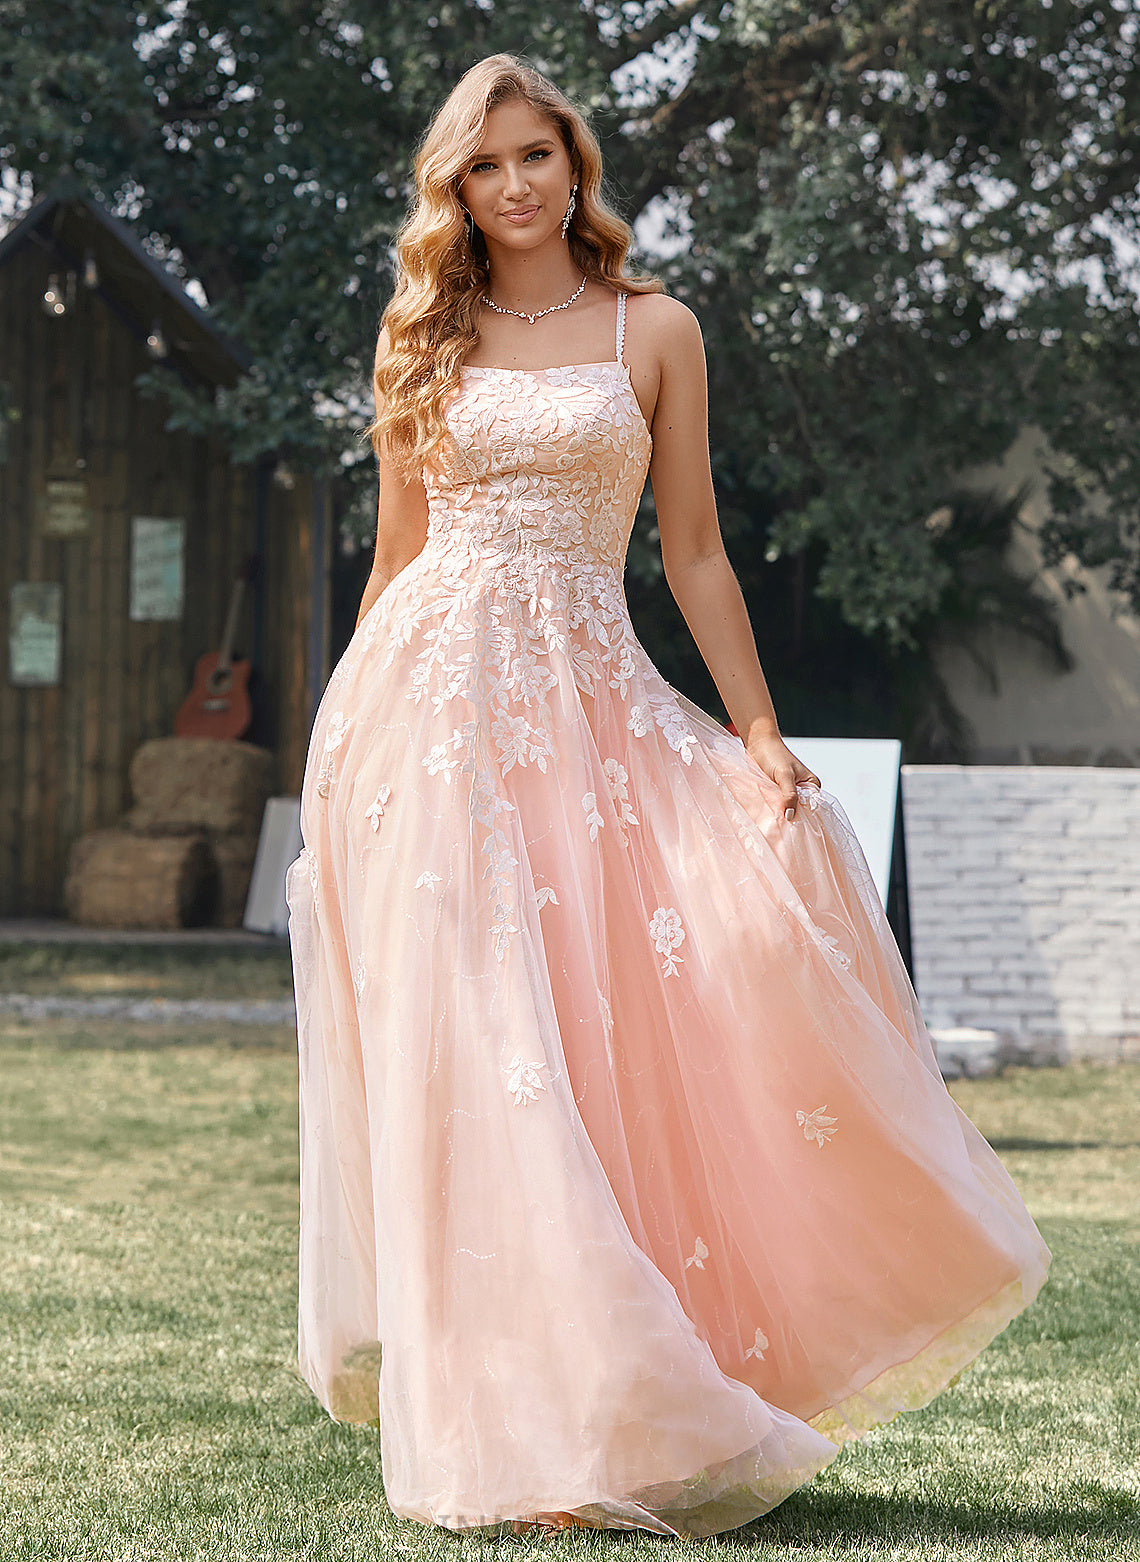 Ball-Gown/Princess Sequins Prom Dresses Lace With Tulle Floor-Length Square Neckline Salma